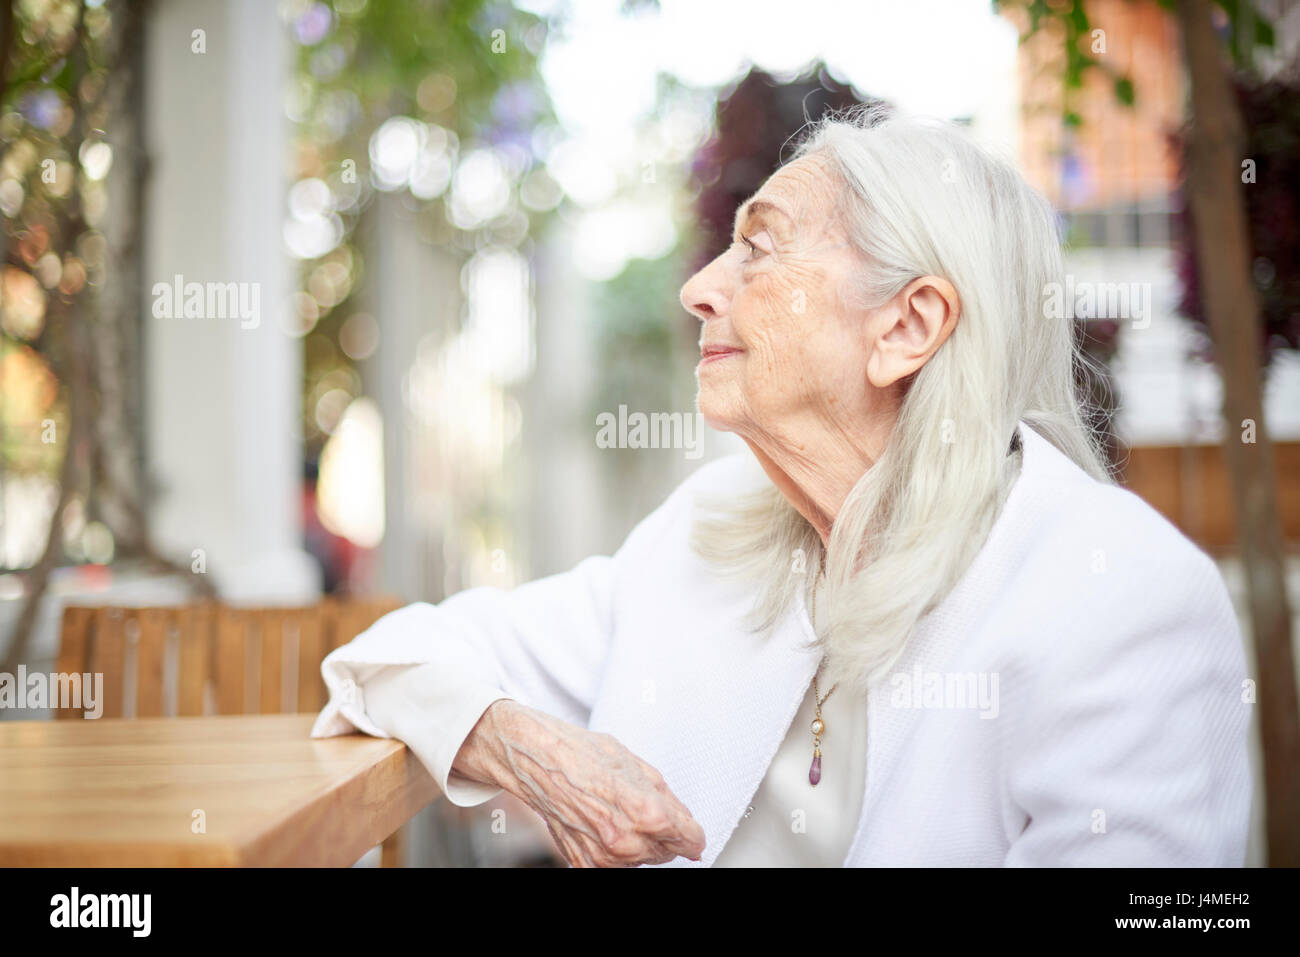 Profile of smiling older Caucasian woman sitting at table Stock Photo